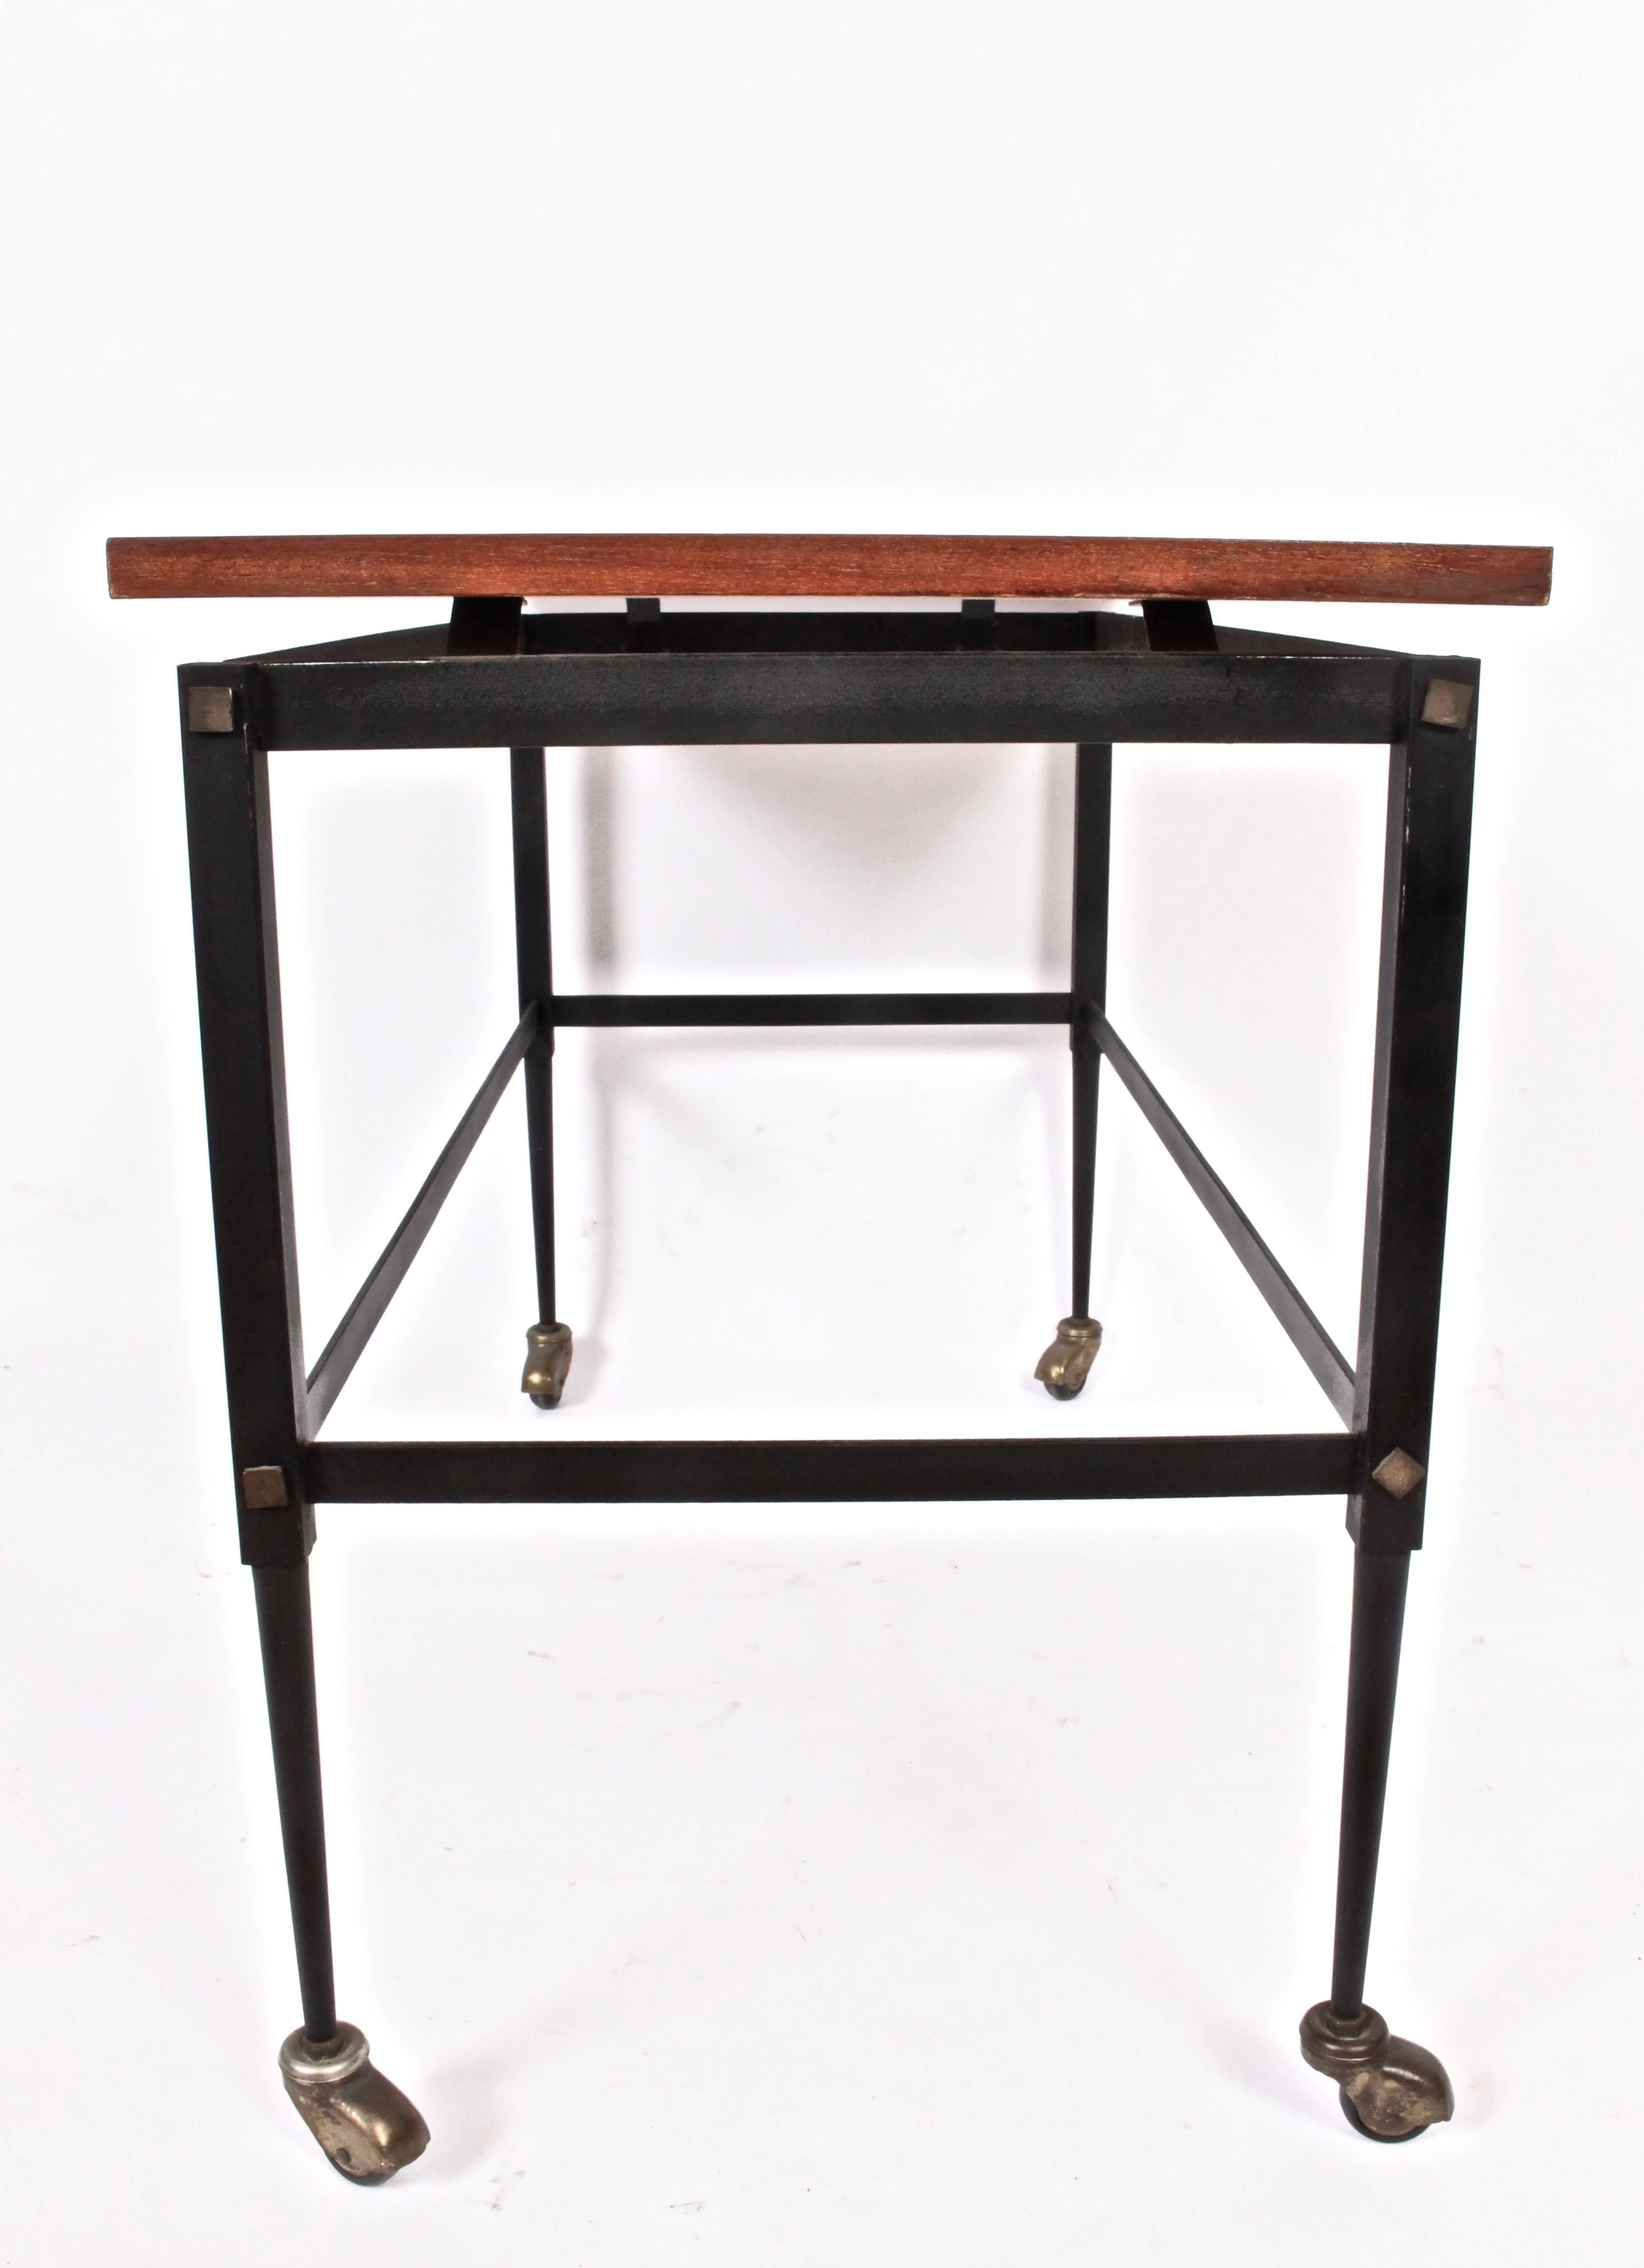 Italian Modern Black enameled Iron Bar Cart with floating Teak Surface. Versatile use as: Serving Cart. Higher Coffee Table. Nightstand, Smaller TV Table. Features a narrow and open rectangular framework, solid Teak surface, Brass hardware and four